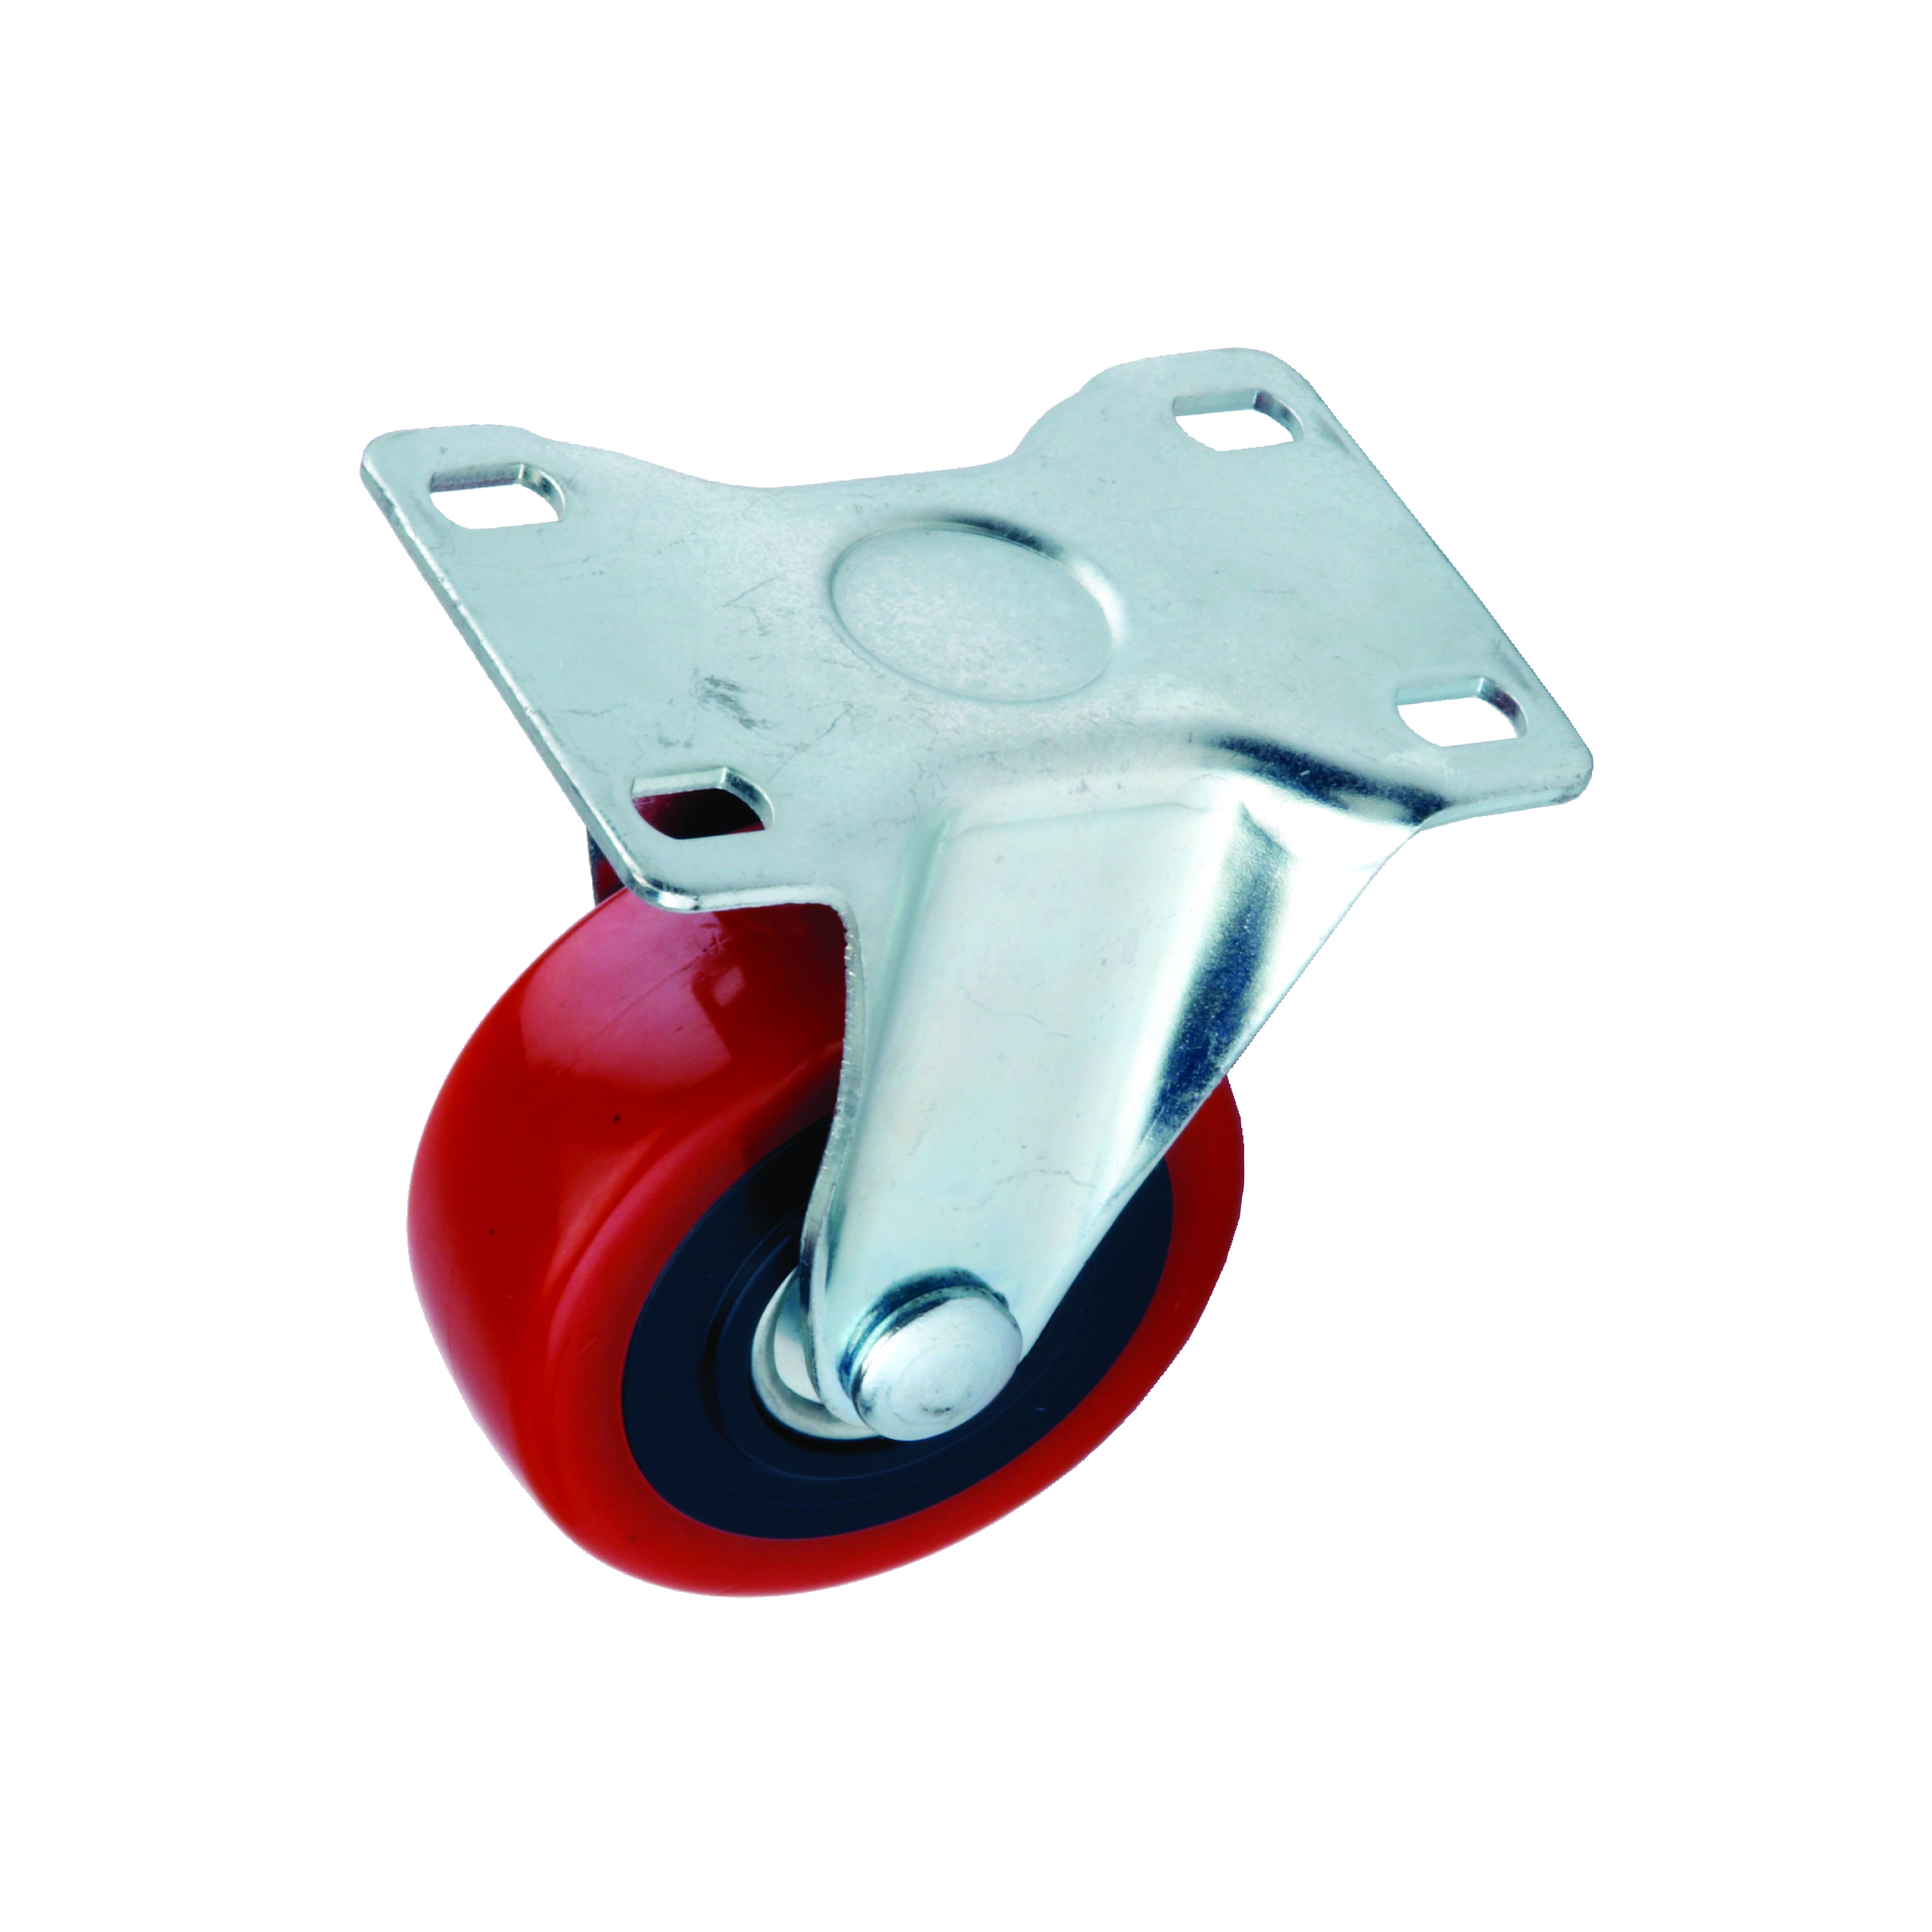 4" Caster, Non-locking, Non-swiveling With 4 Hole Mounting Plate